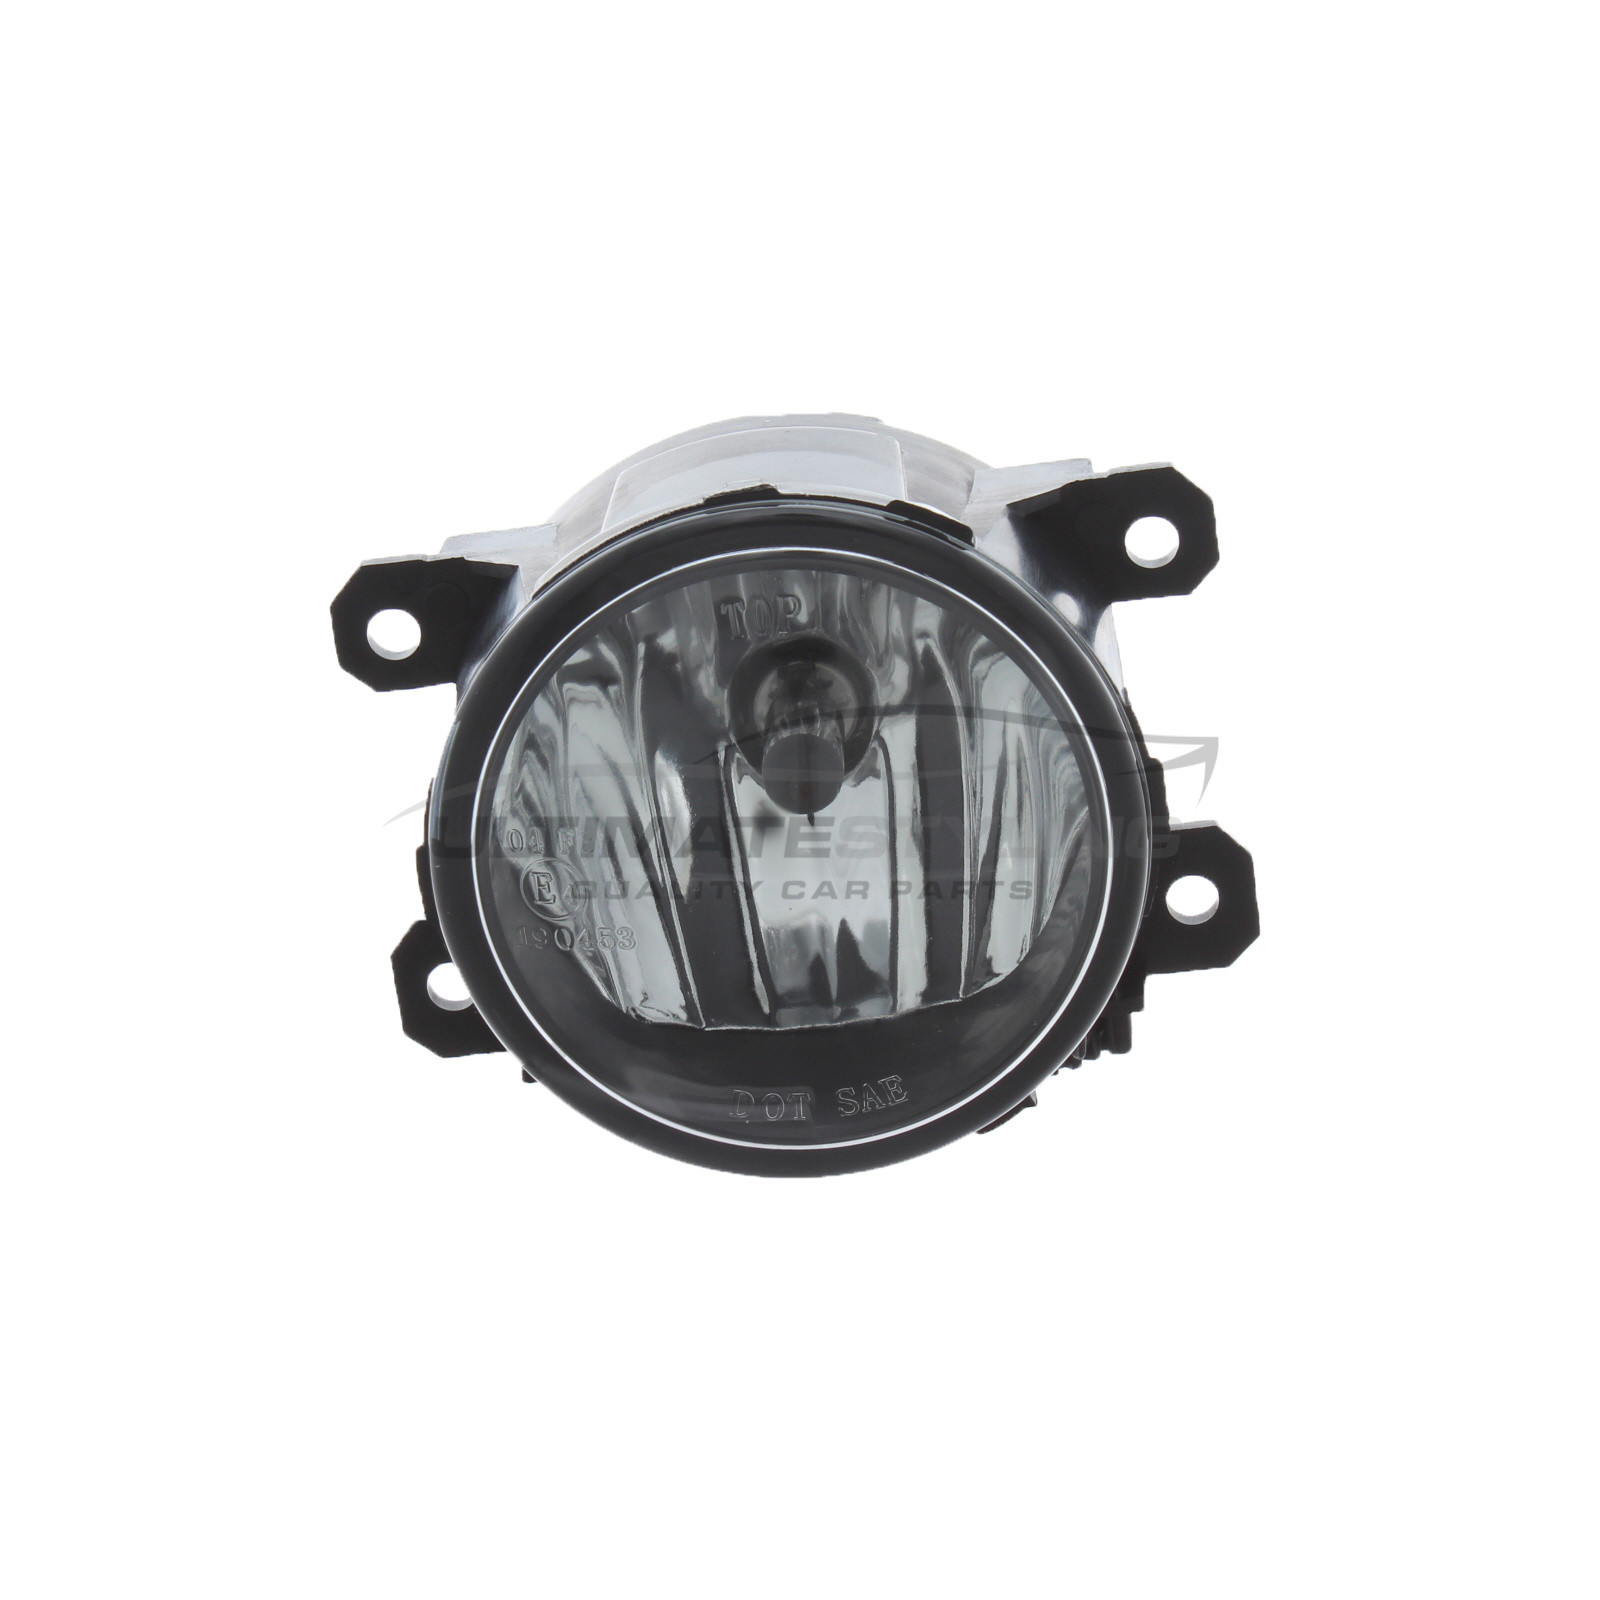 Front Fog Light - Universal (LH or RH) - For Citroen Berlingo , C4 , C4 Grand Picasso , C4 Grand Spacetourer , C4 Picasso , C4 Spacetourer , Dispatch , DS4 , SpaceTourer / Peugeot 3008 , 308 , Expert , Partner , Traveller / Toyota Proace, and others